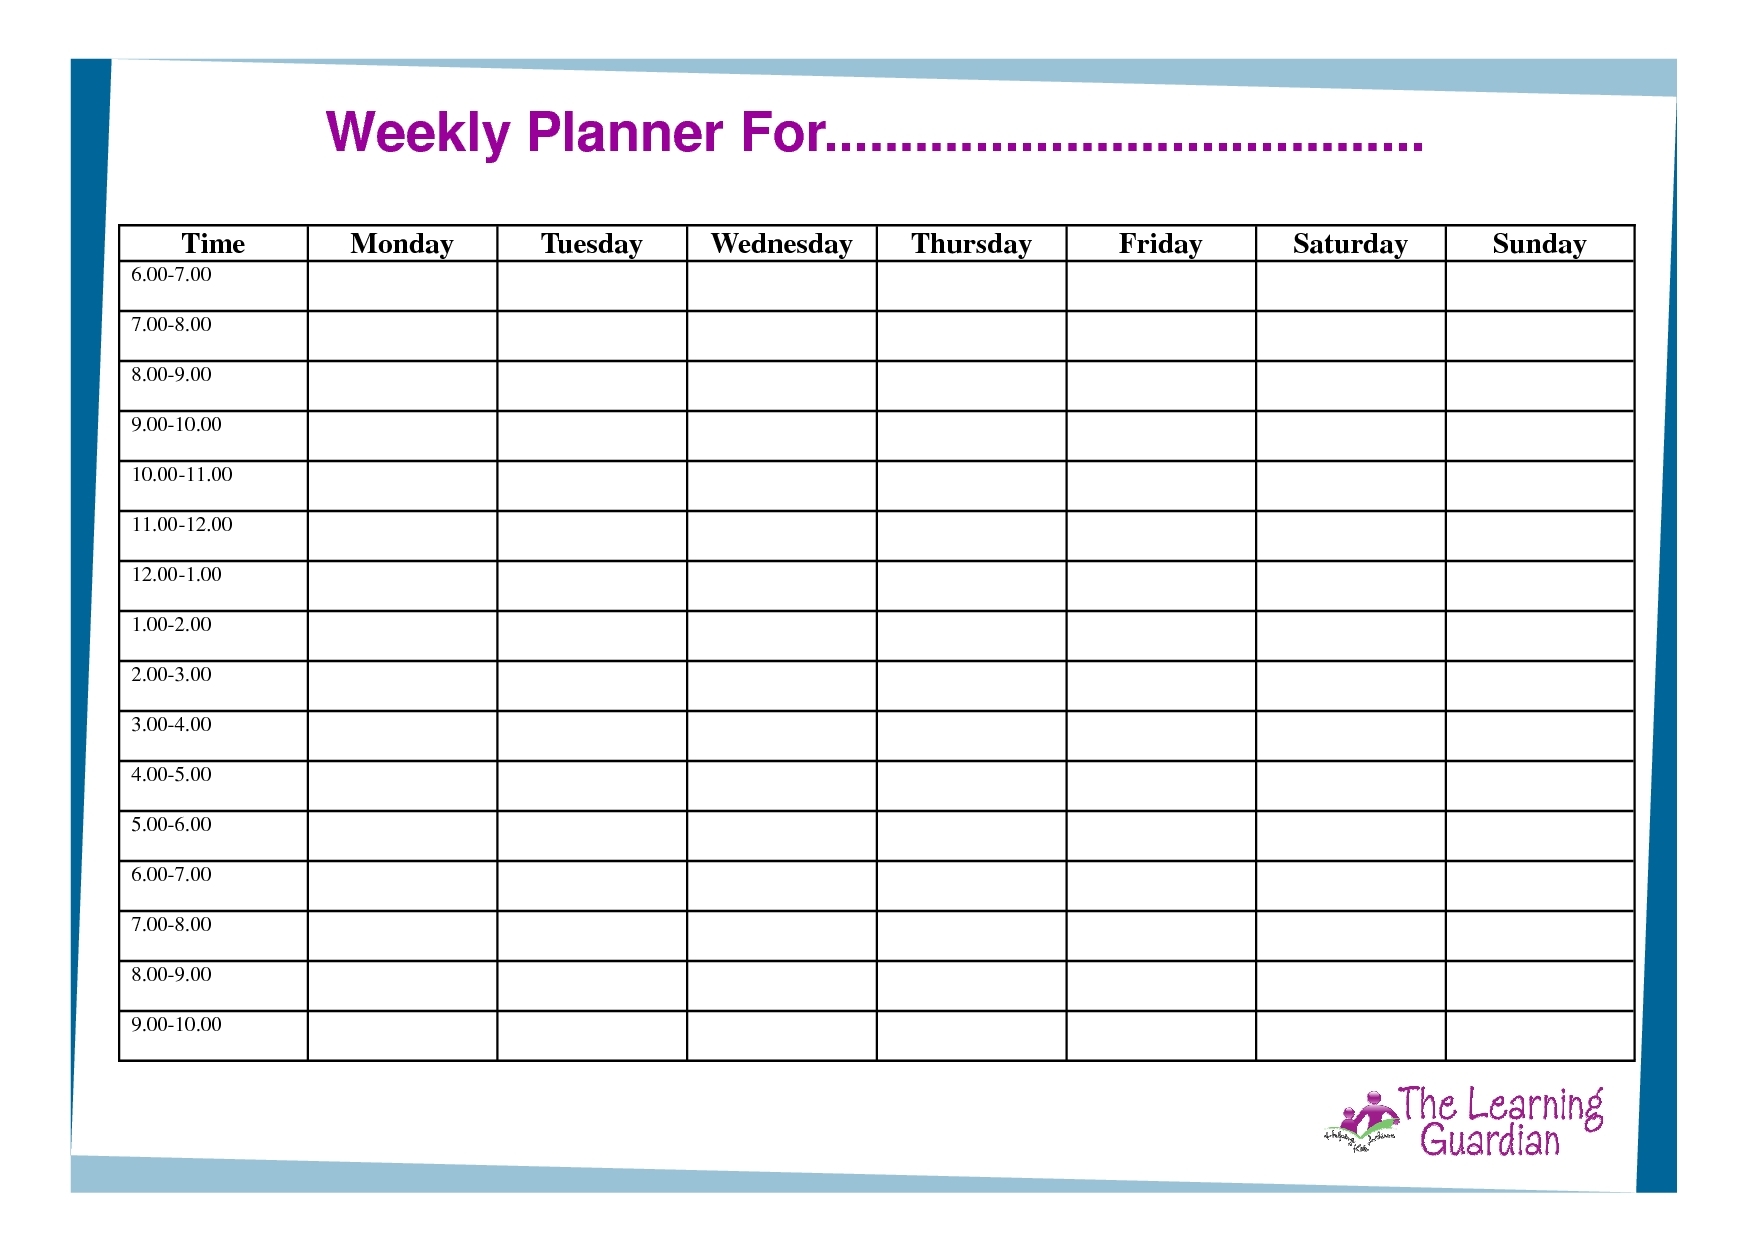 Monday To Friday Timetable Template | Calendar Printing Example-Monday - Friday Timetable Template